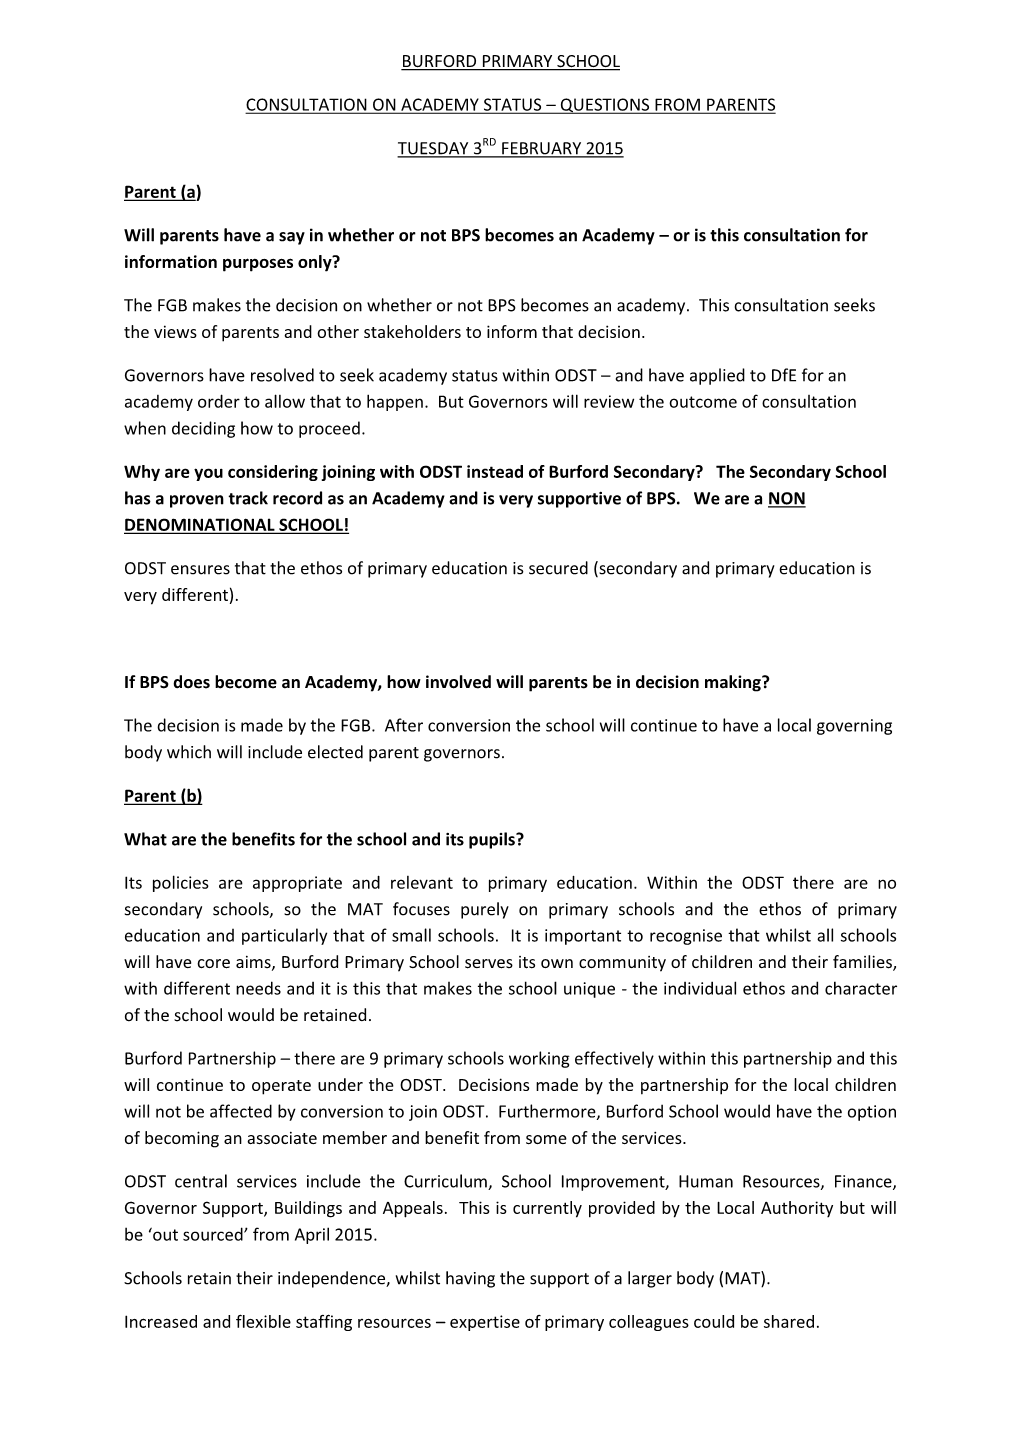 BURFORD PRIMARY SCHOOL CONSULTATION on ACADEMY STATUS – QUESTIONS from PARENTS TUESDAY 3RD FEBRUARY 2015 Parent (A) Will Paren